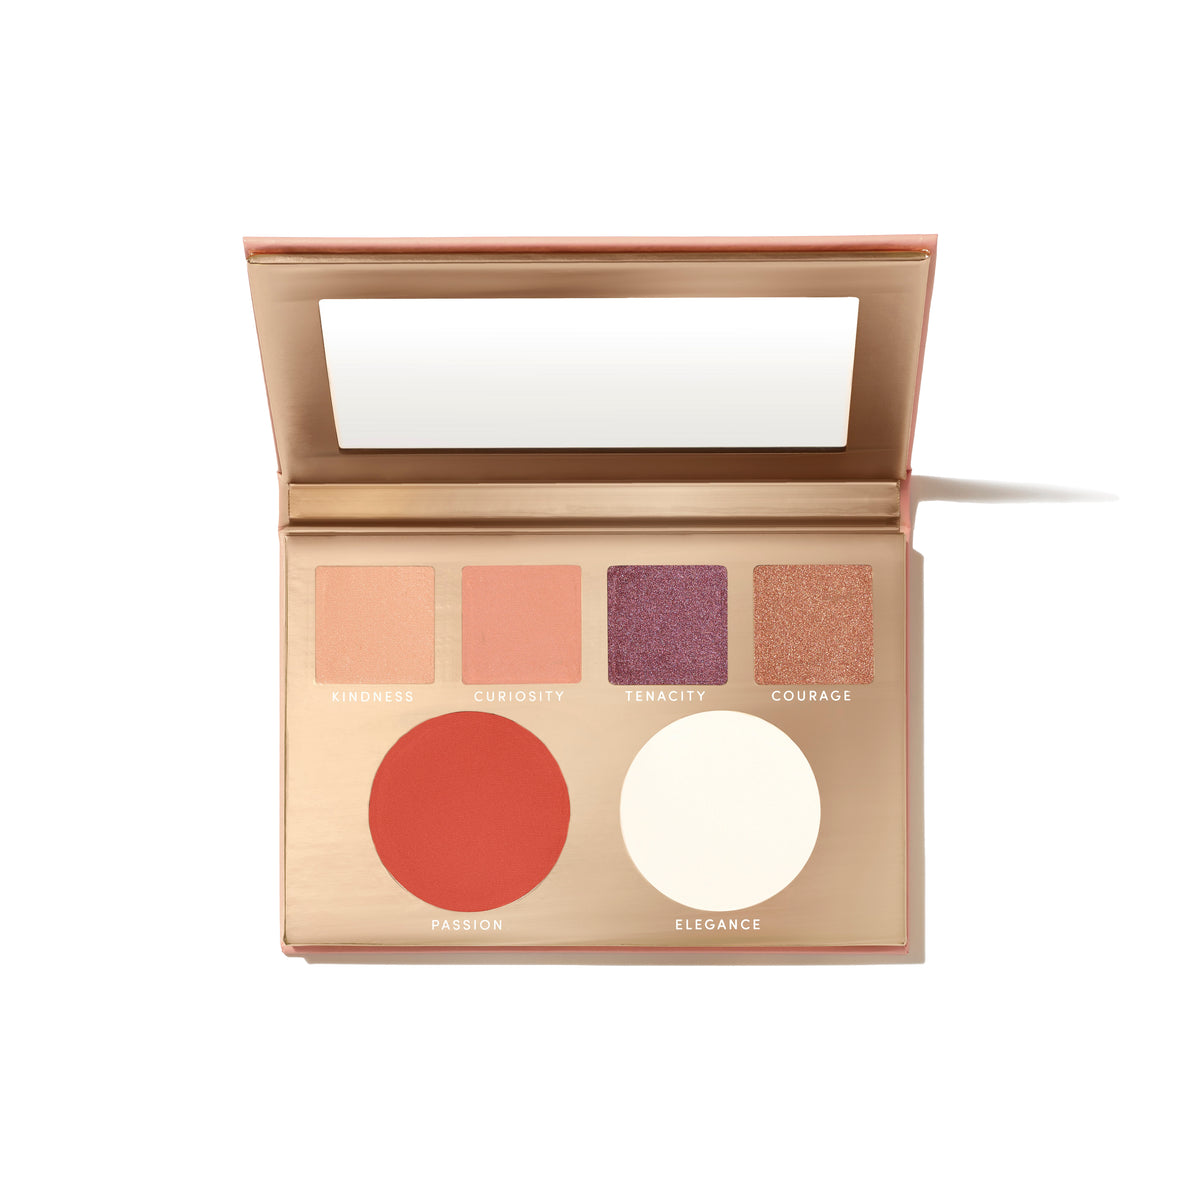 Reflections Limited Edition Face Palette